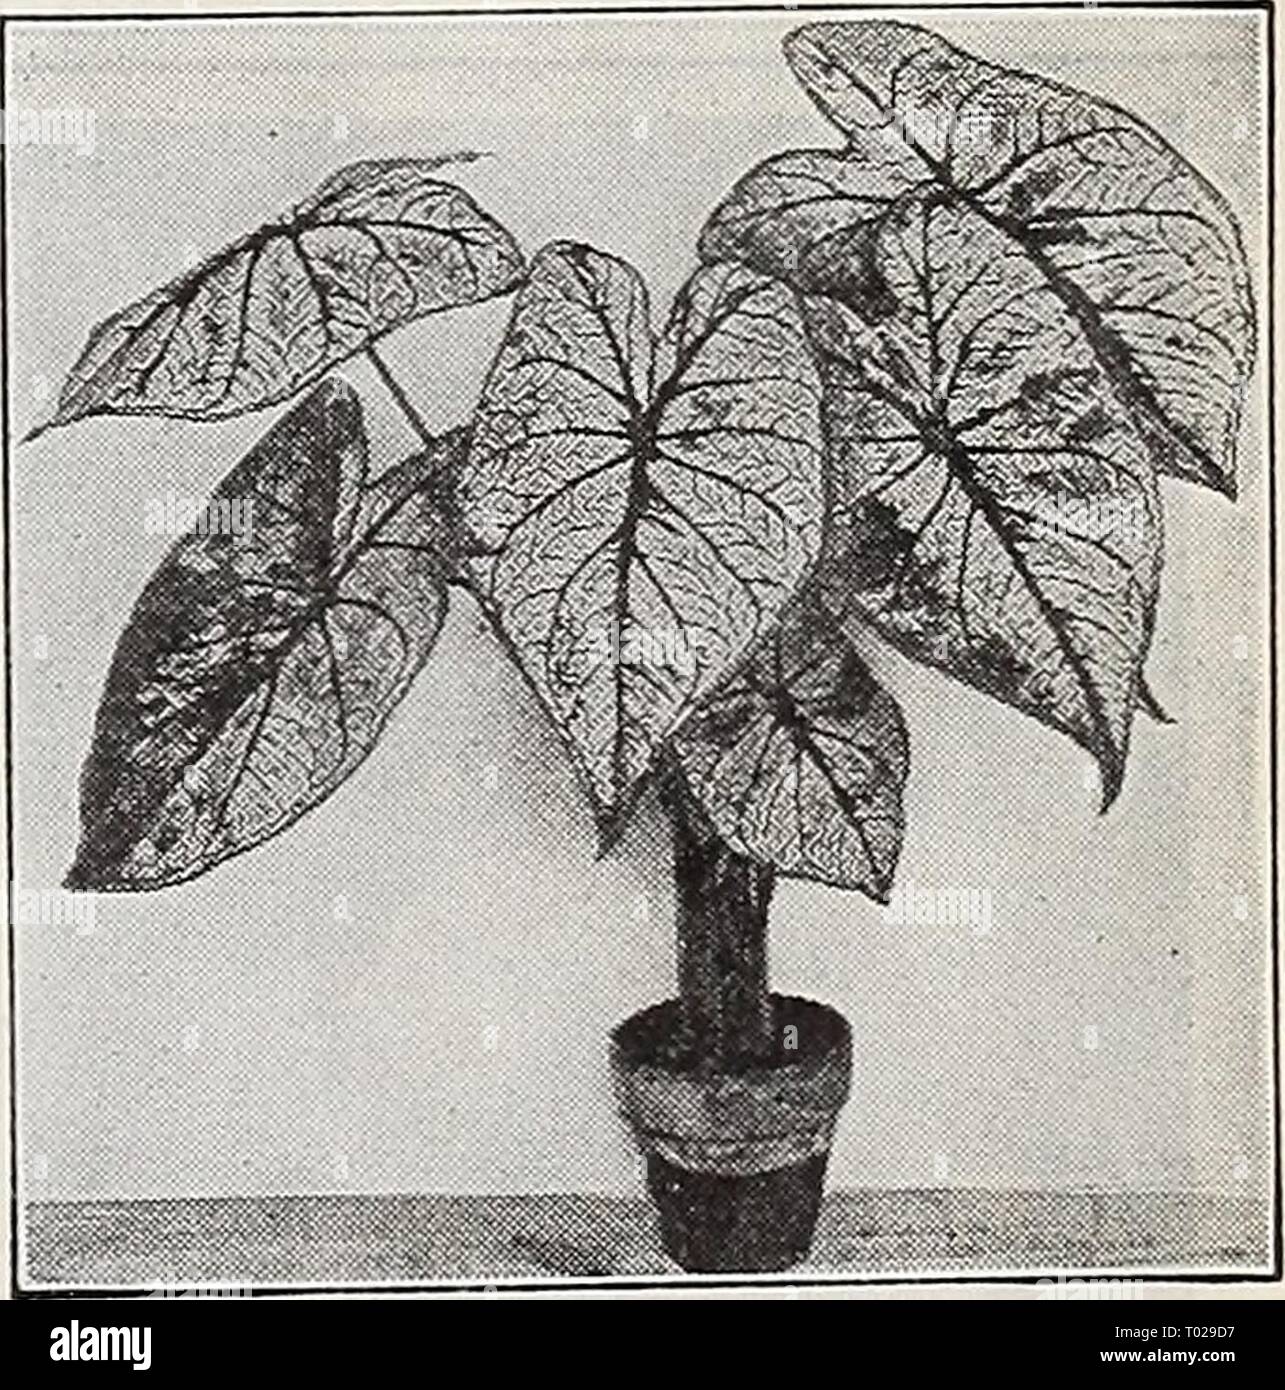 Dreer's garden book for 1940 . dreersgardenbook1940henr Year: 1940  Dreer's Gold Medal Amaryllis H w^^ ^ jfl^^^^^l ^^t^I^^^^^hL ^h ^ ^B Bill Hardy Begonia Evansiana    Fancy-Leaved Caladium 13-050 Galtonia—S^^i?Sr„^'' Cape Hyacinth (§) Makes a strong stately flower spike 3 to 5 feet tall, which bears from 20 to 30 pure white, bell-shaped blooms during the sum- mer and early fall. It is hardy around Philadelphia. 20c each; §2.00 per doz. Amorphophallus (§&gt; Rivieri—Devil's Tongue A curious and interesting plant produc- ing from the dry bulb during late winter and early spring a thick tall ste Stock Photo